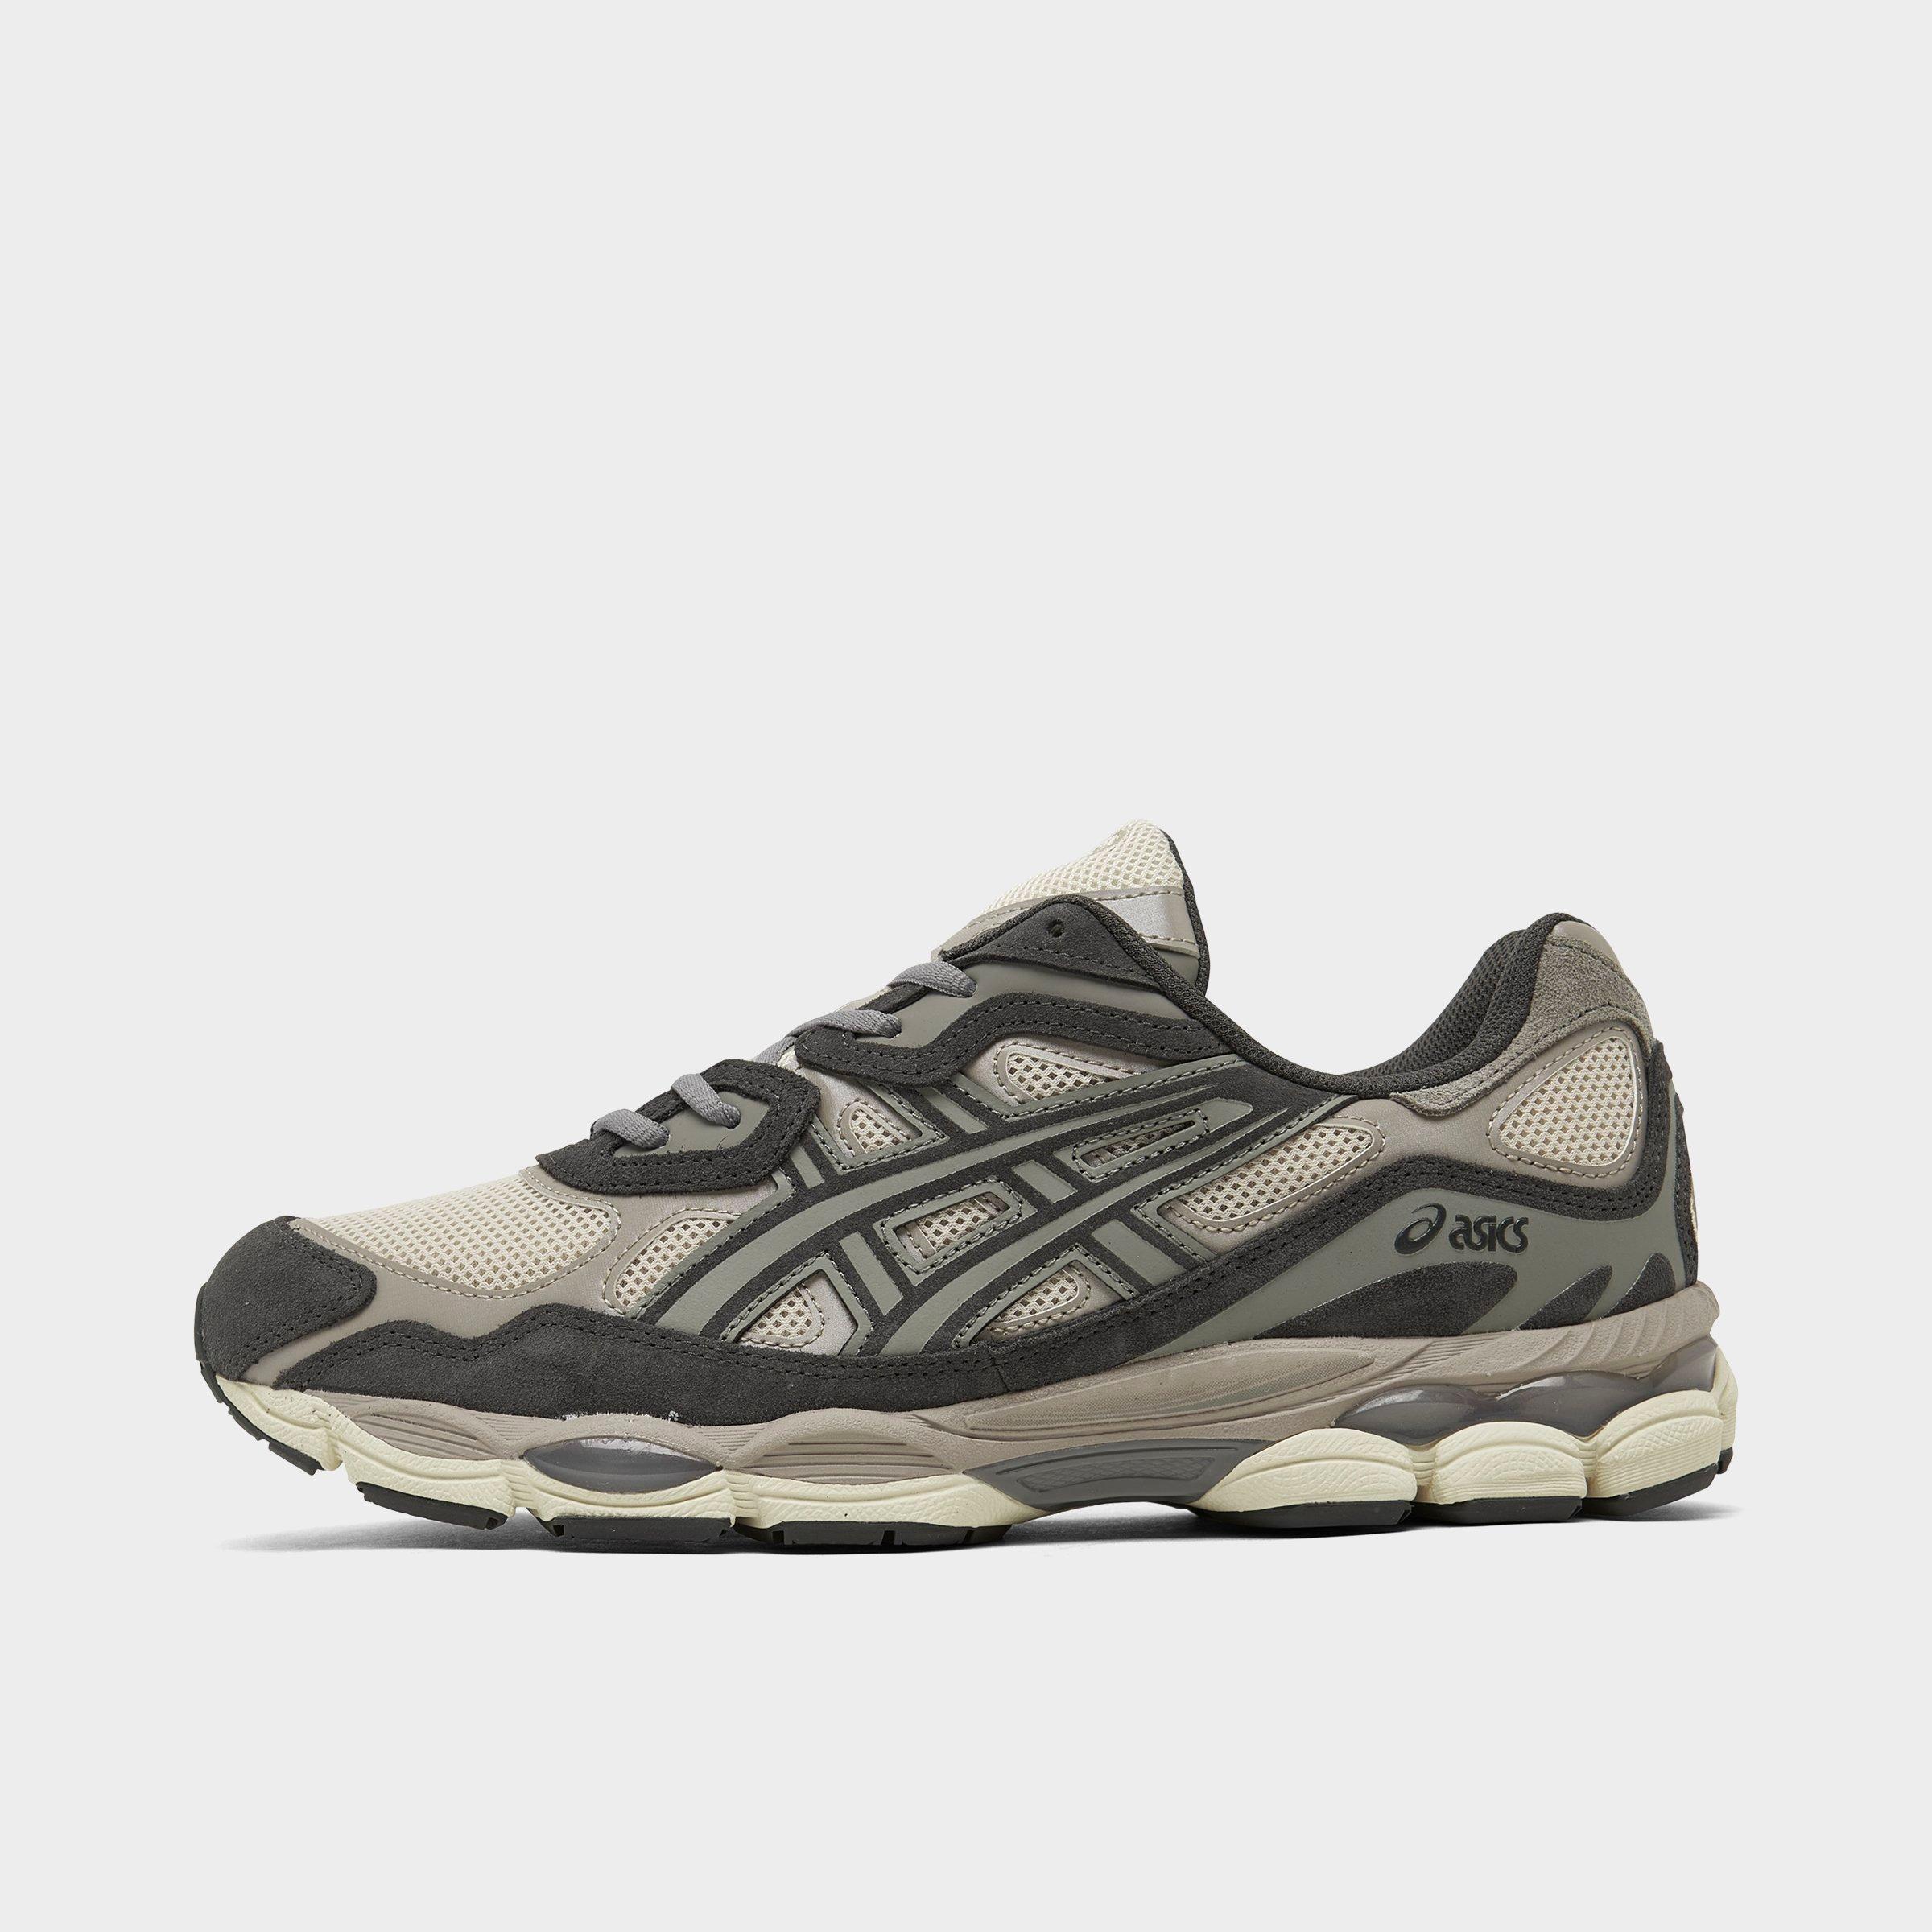 Asics Gel-nyc Running Shoes In Graphite Grey/black